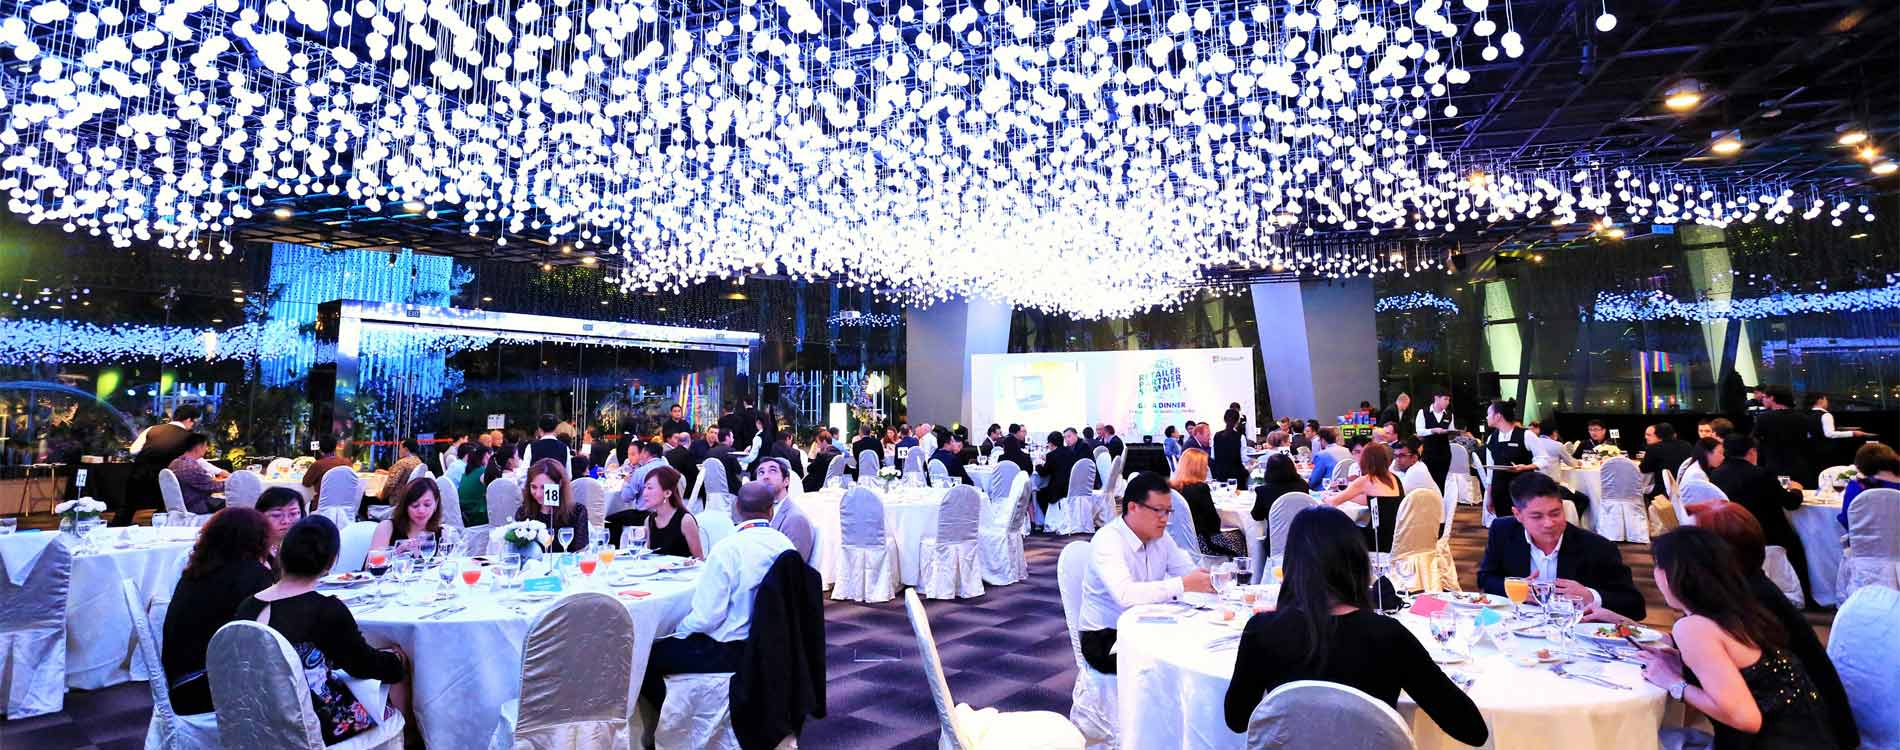 event management service in singapore